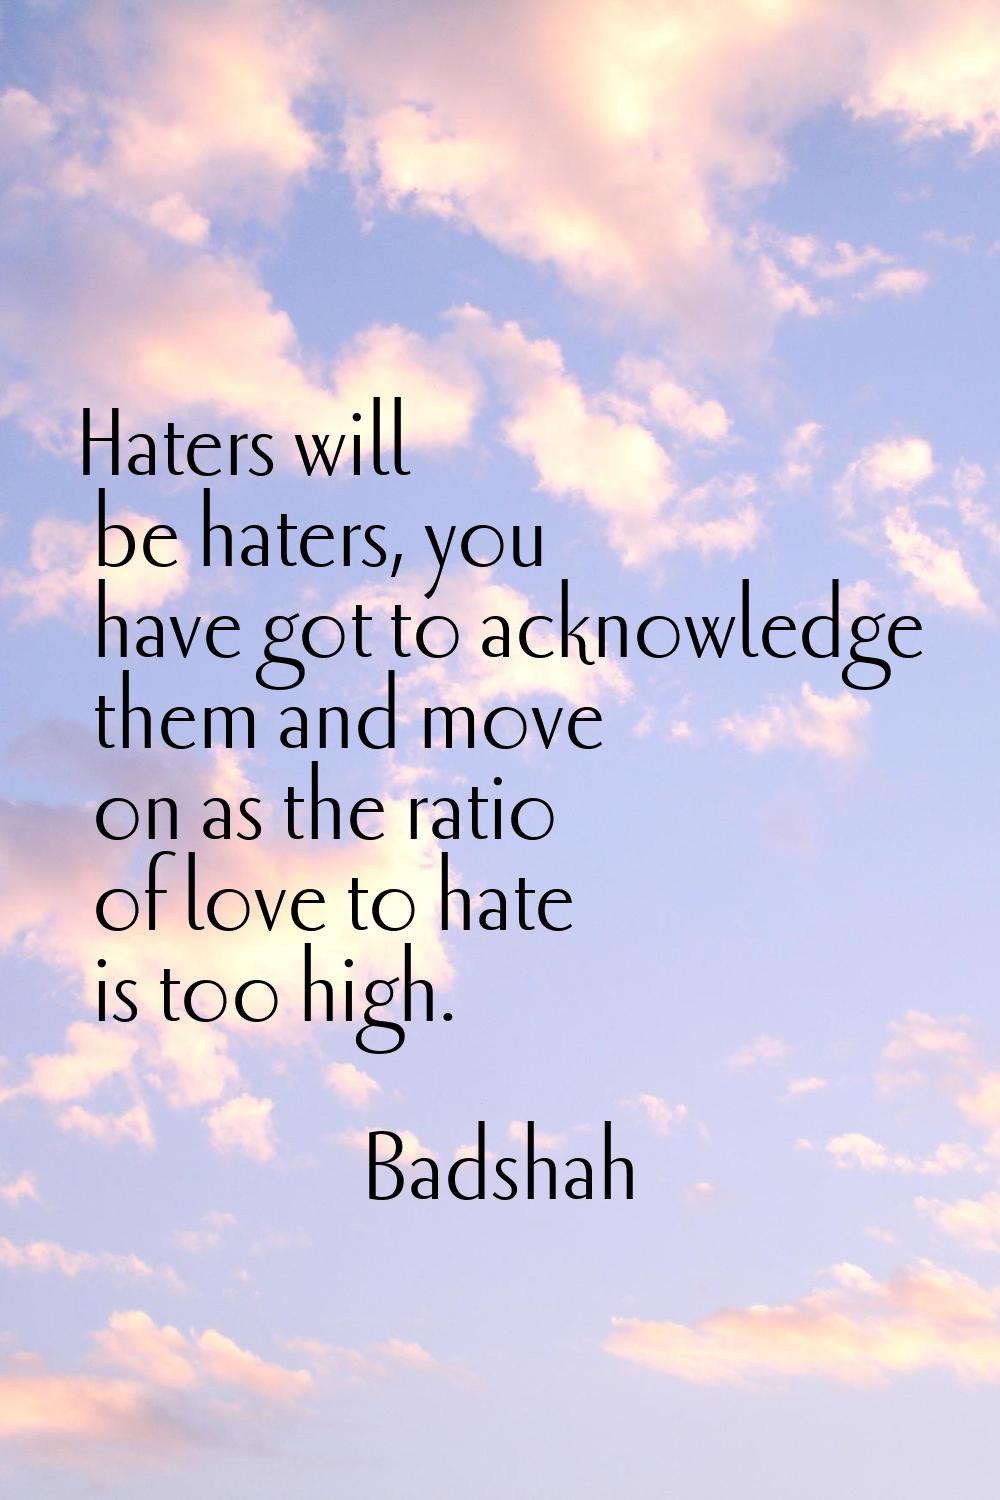 Haters will be haters, you have got to acknowledge them and move on as the ratio of love to hate is